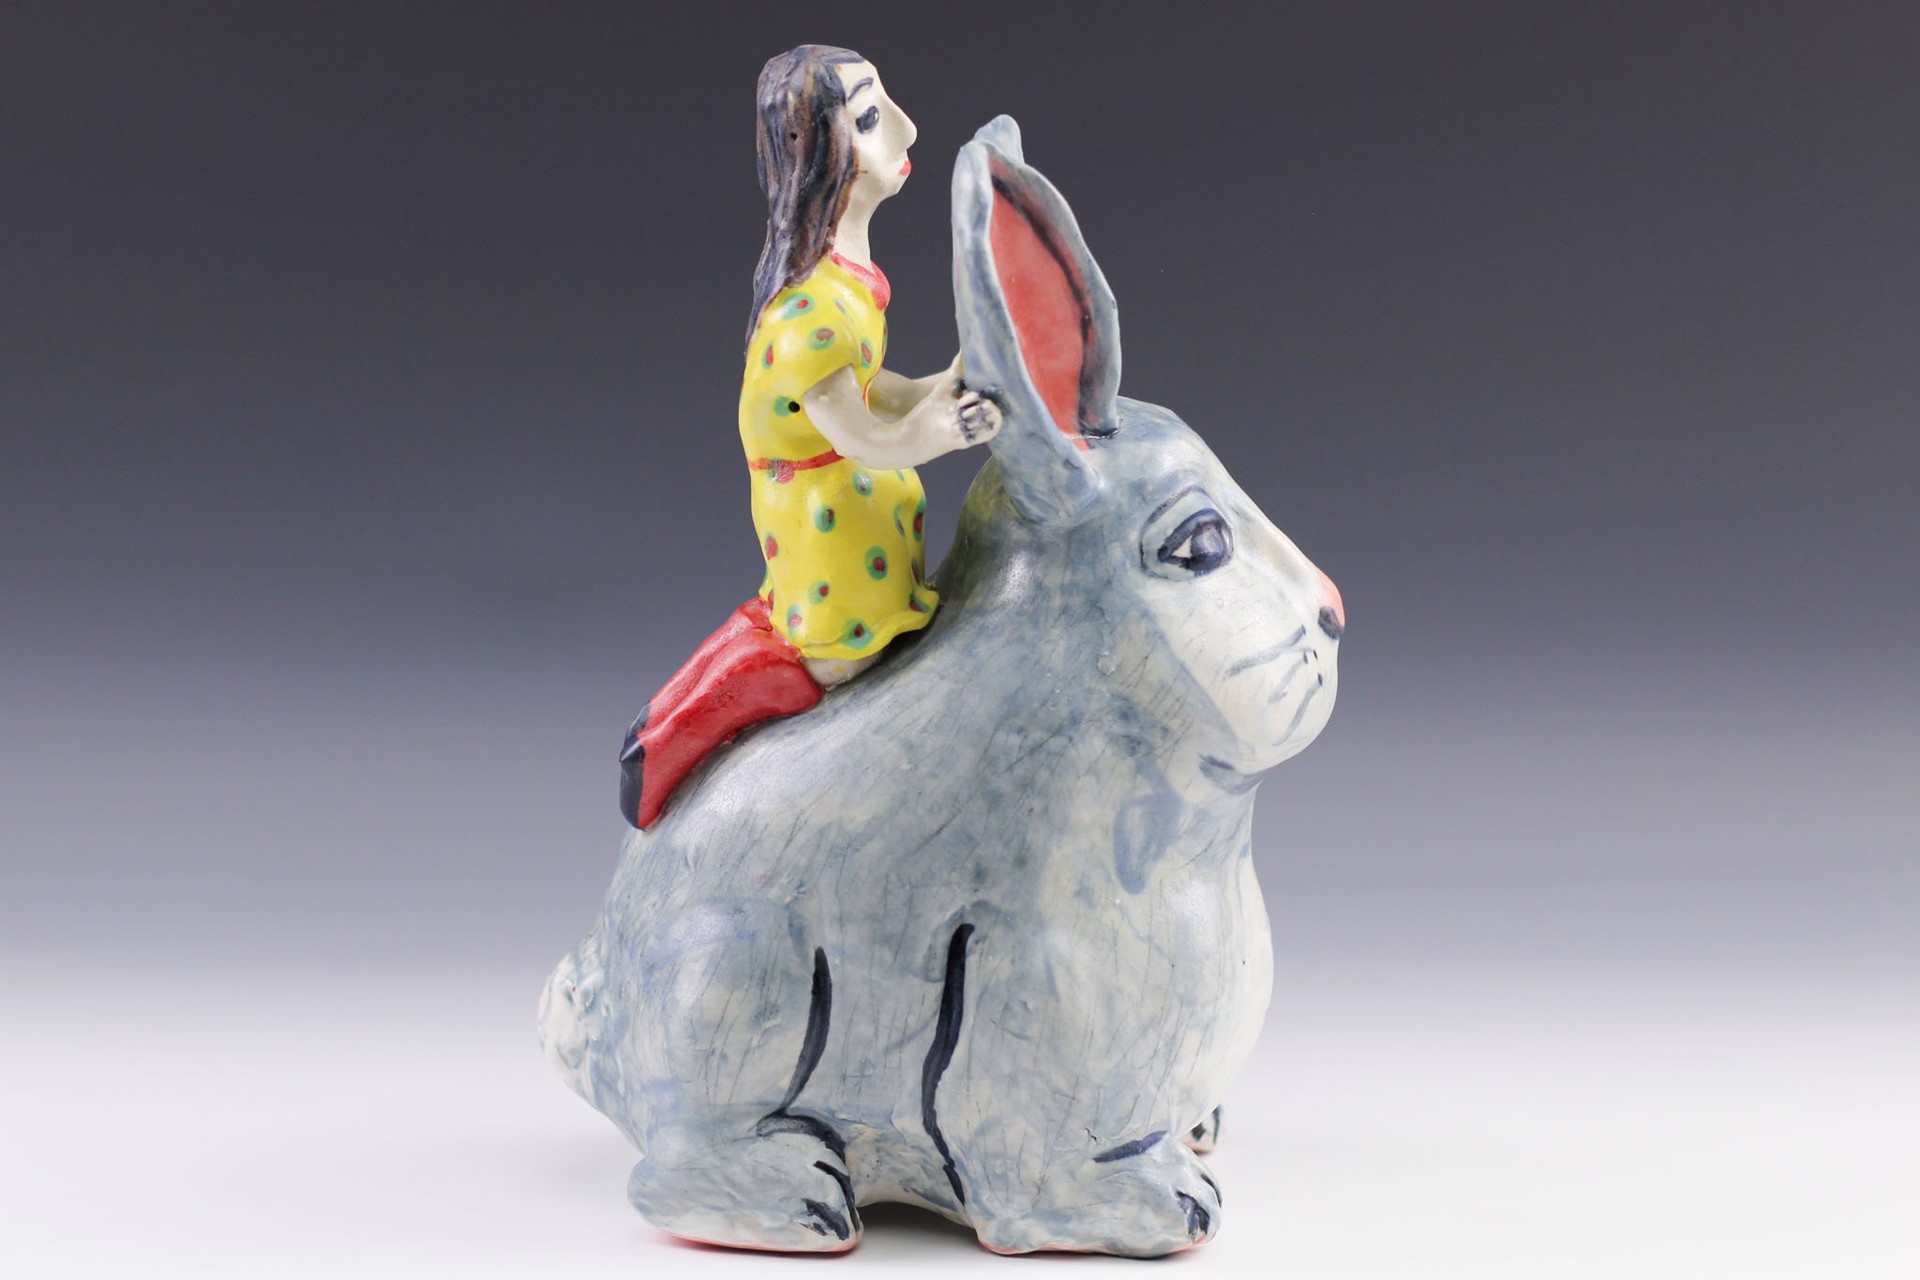 Girl Riding Rabbit Sculpture by Wendy Olson